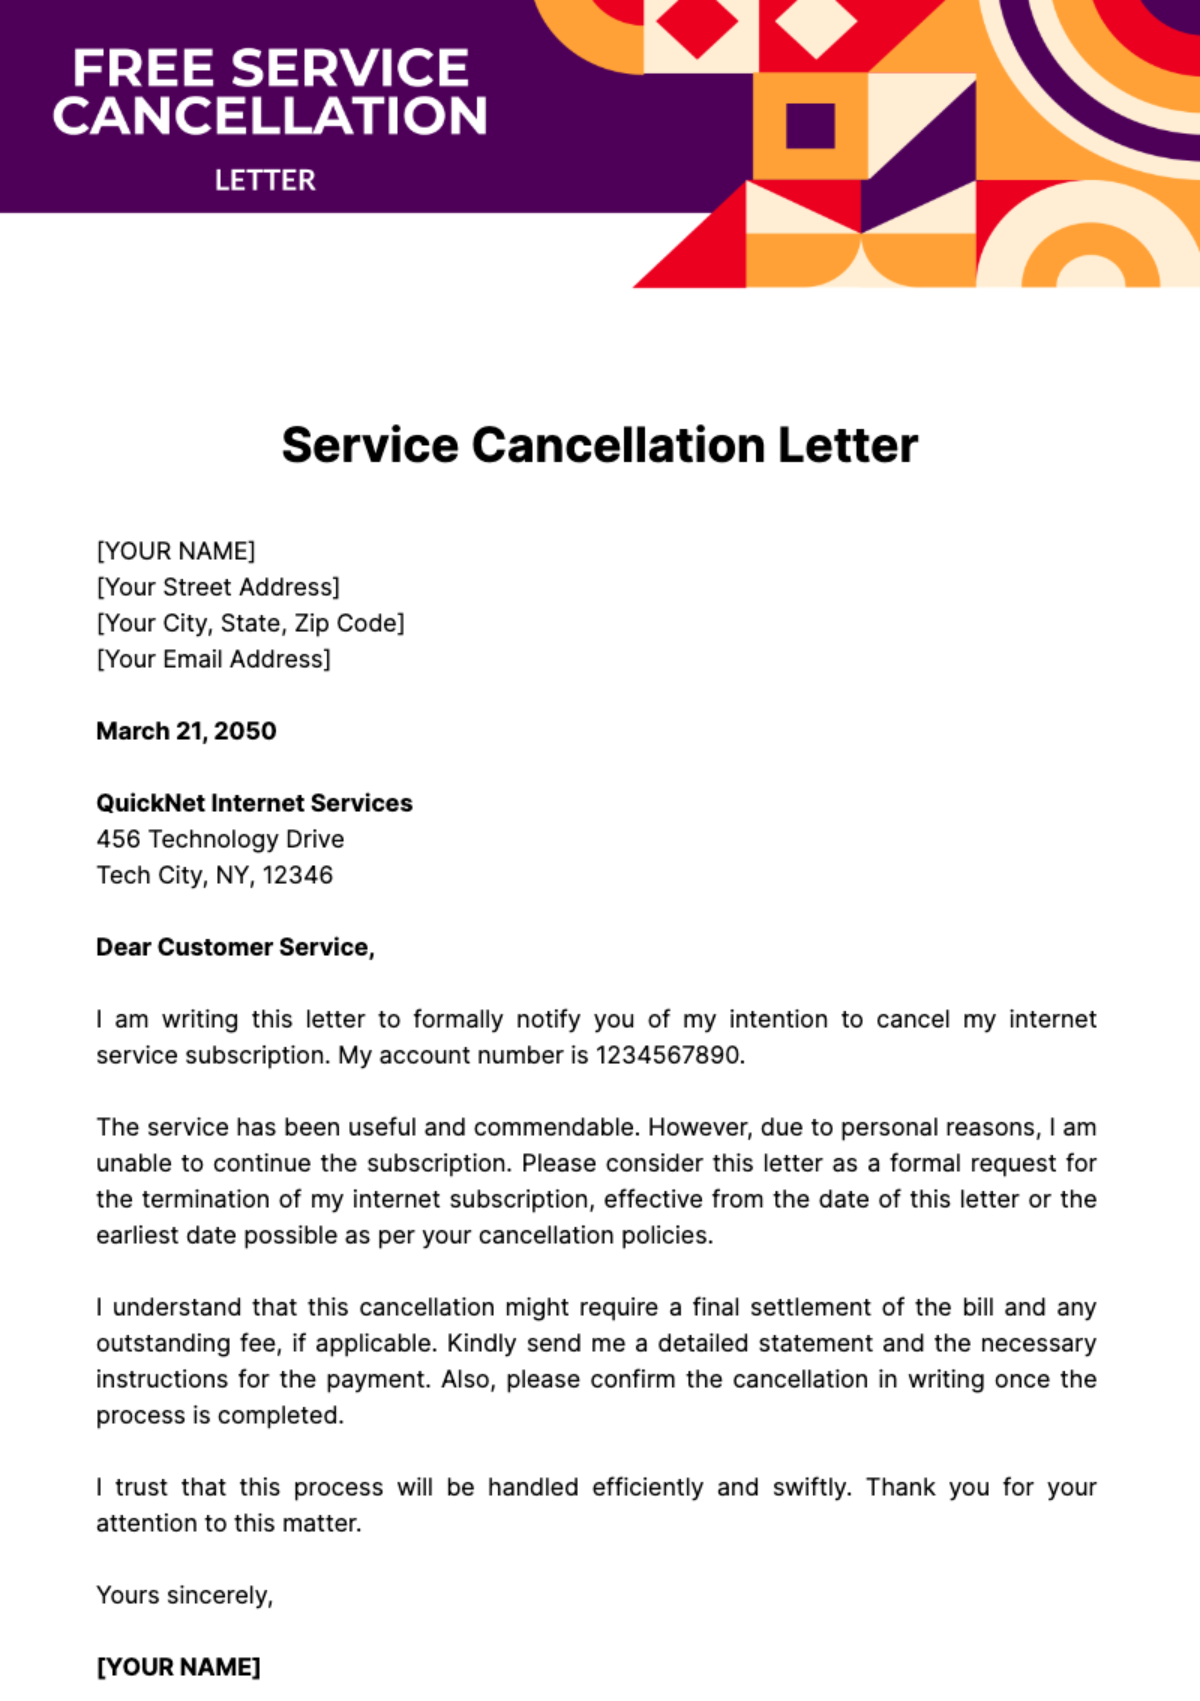 Free Service Cancellation Letter Template